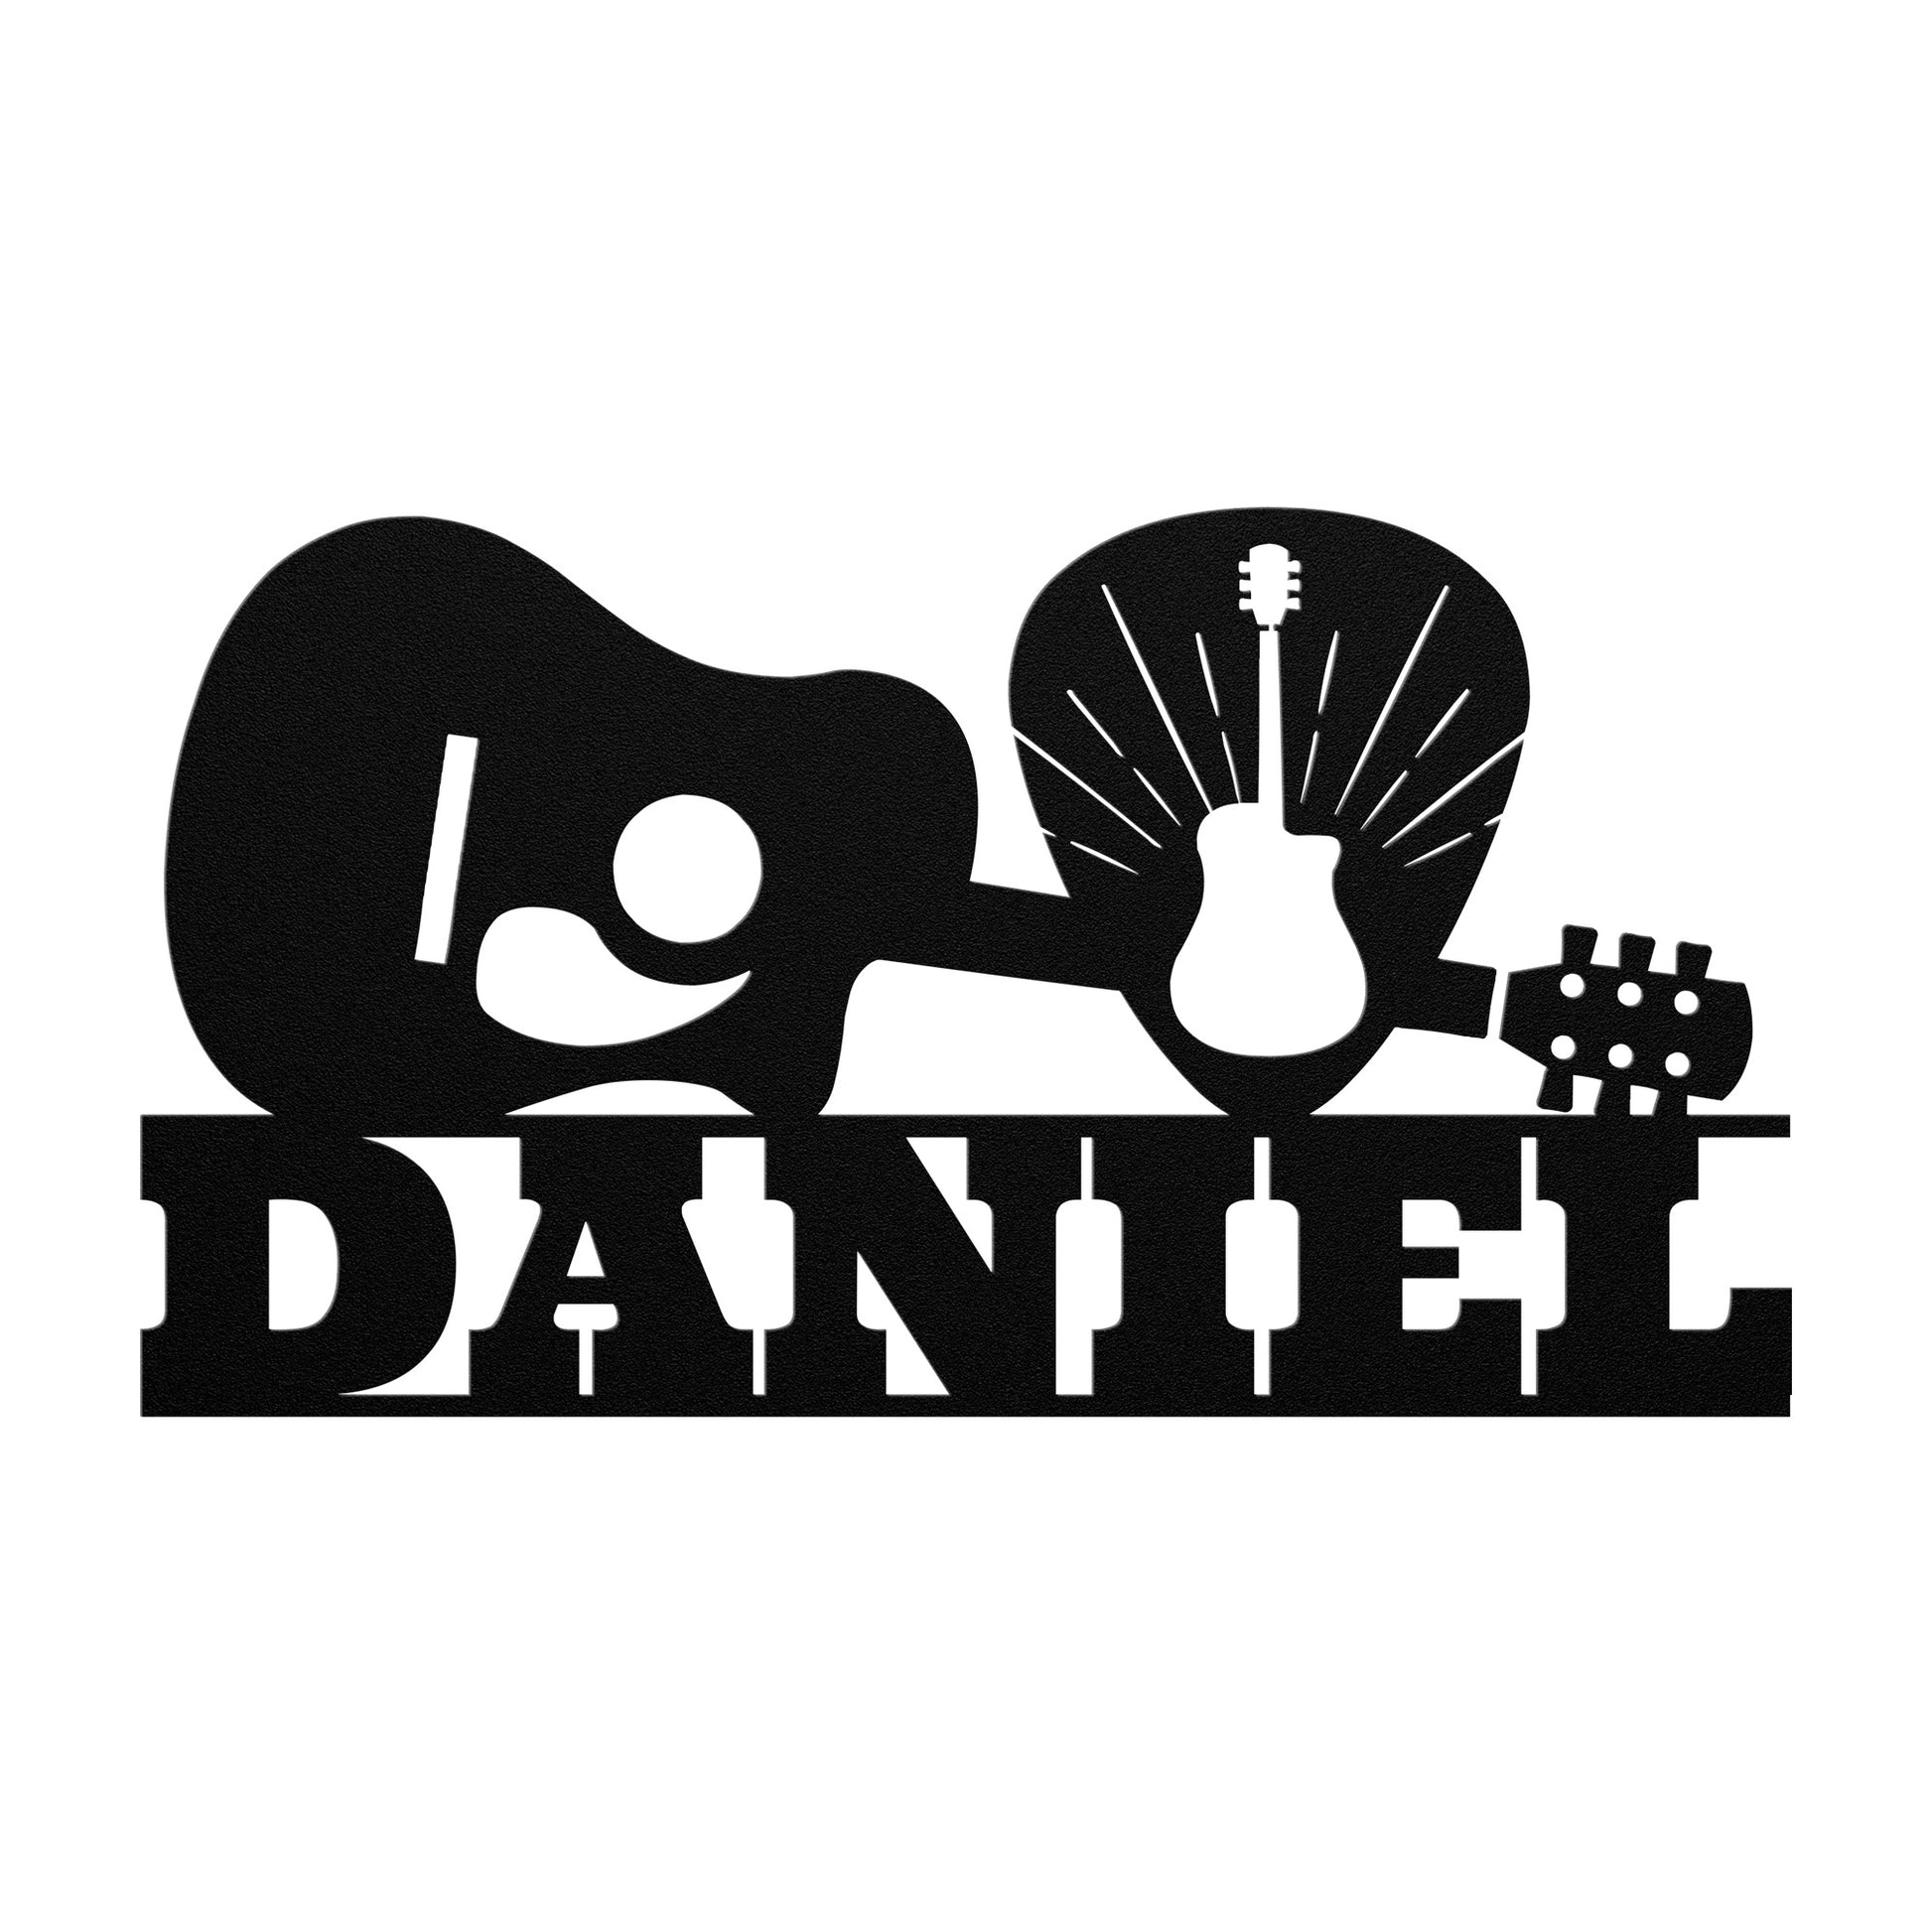 Custom music-themed Acoustic Guitar Wall Sign Custom Name for the music lover with the word "daniel" featuring a silhouette of an electric guitar and a lightbulb, symbolizing a blend of creativity and musical passion.